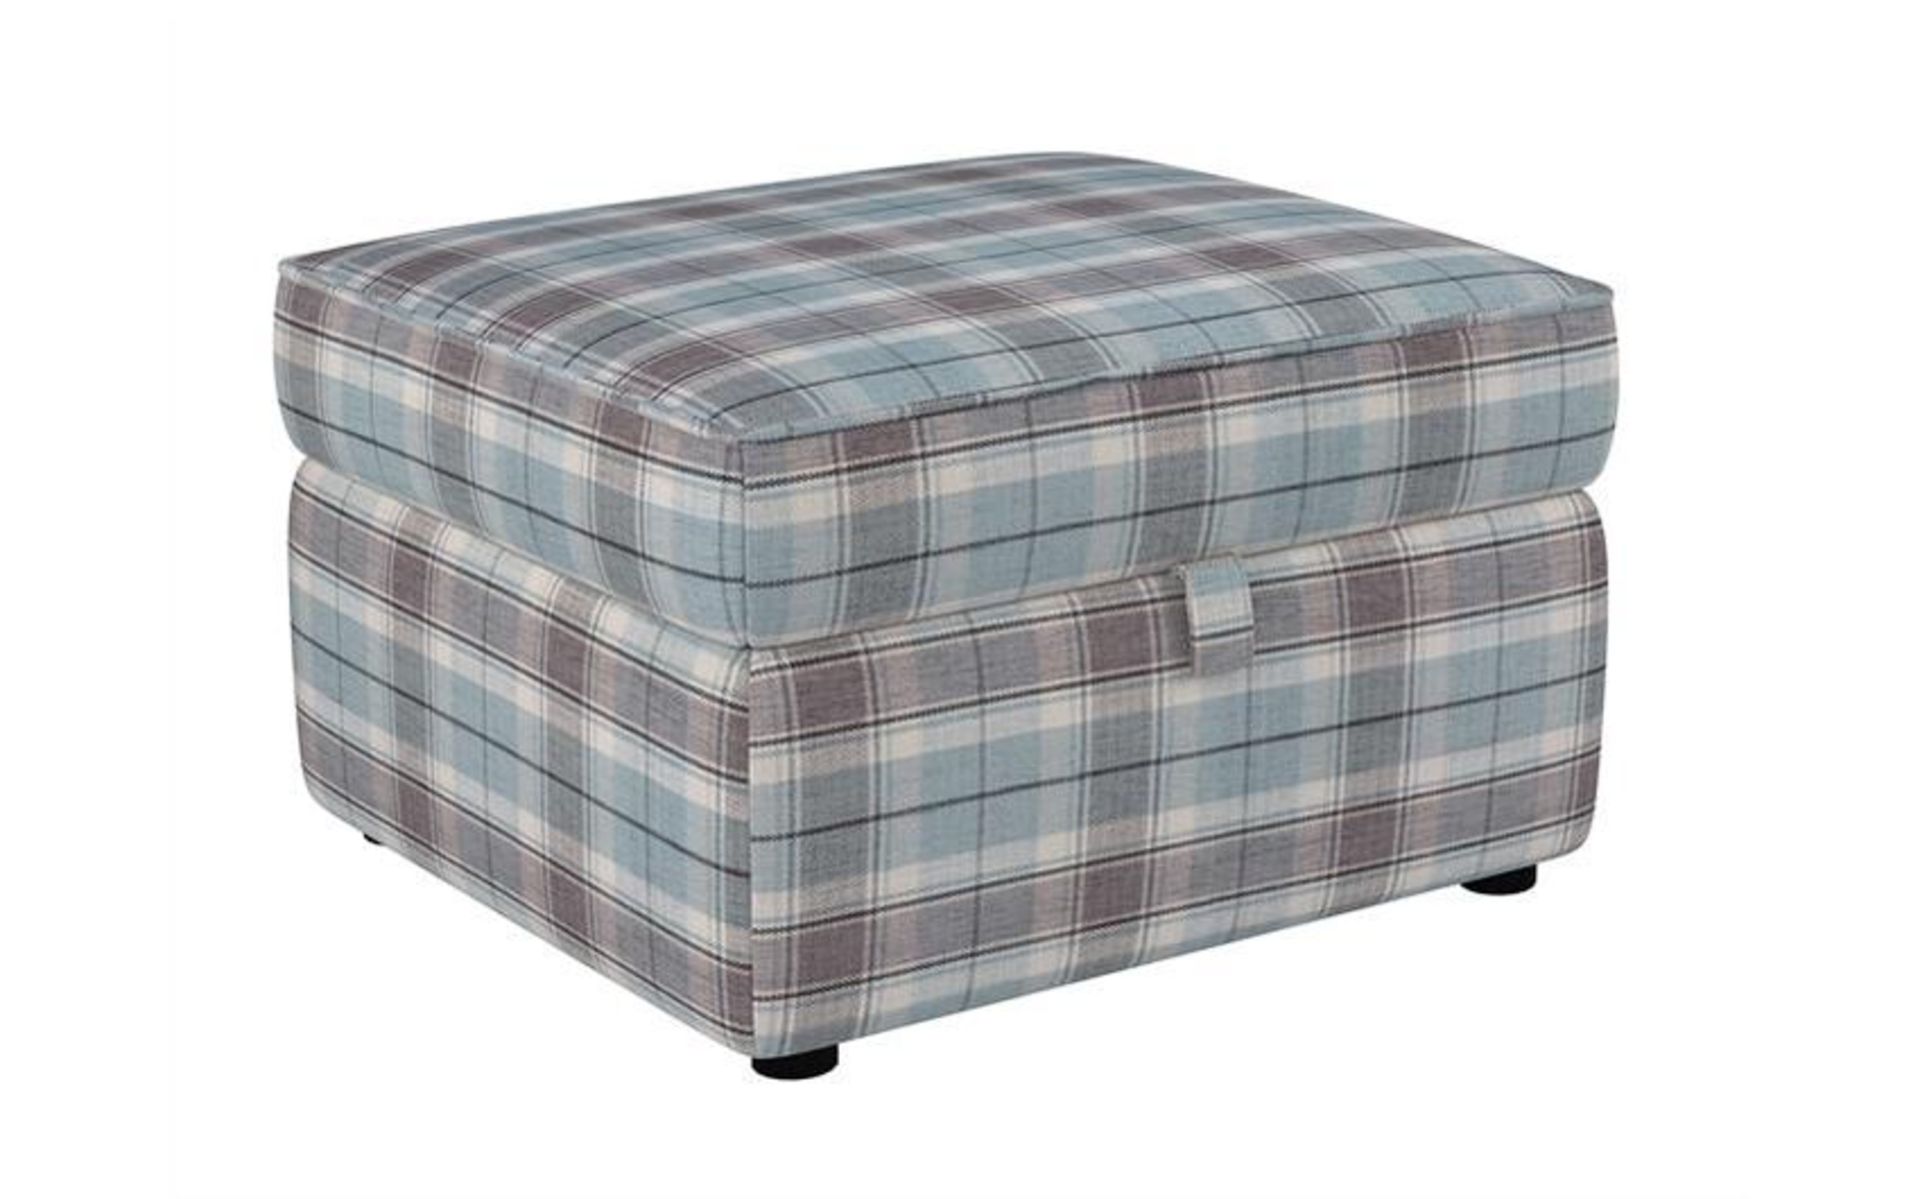 ScS Roseland Storage Footstool 0052 Duck Egg Oban Plaid Black Glides RRP 469 About the Product(s) - Image 2 of 2